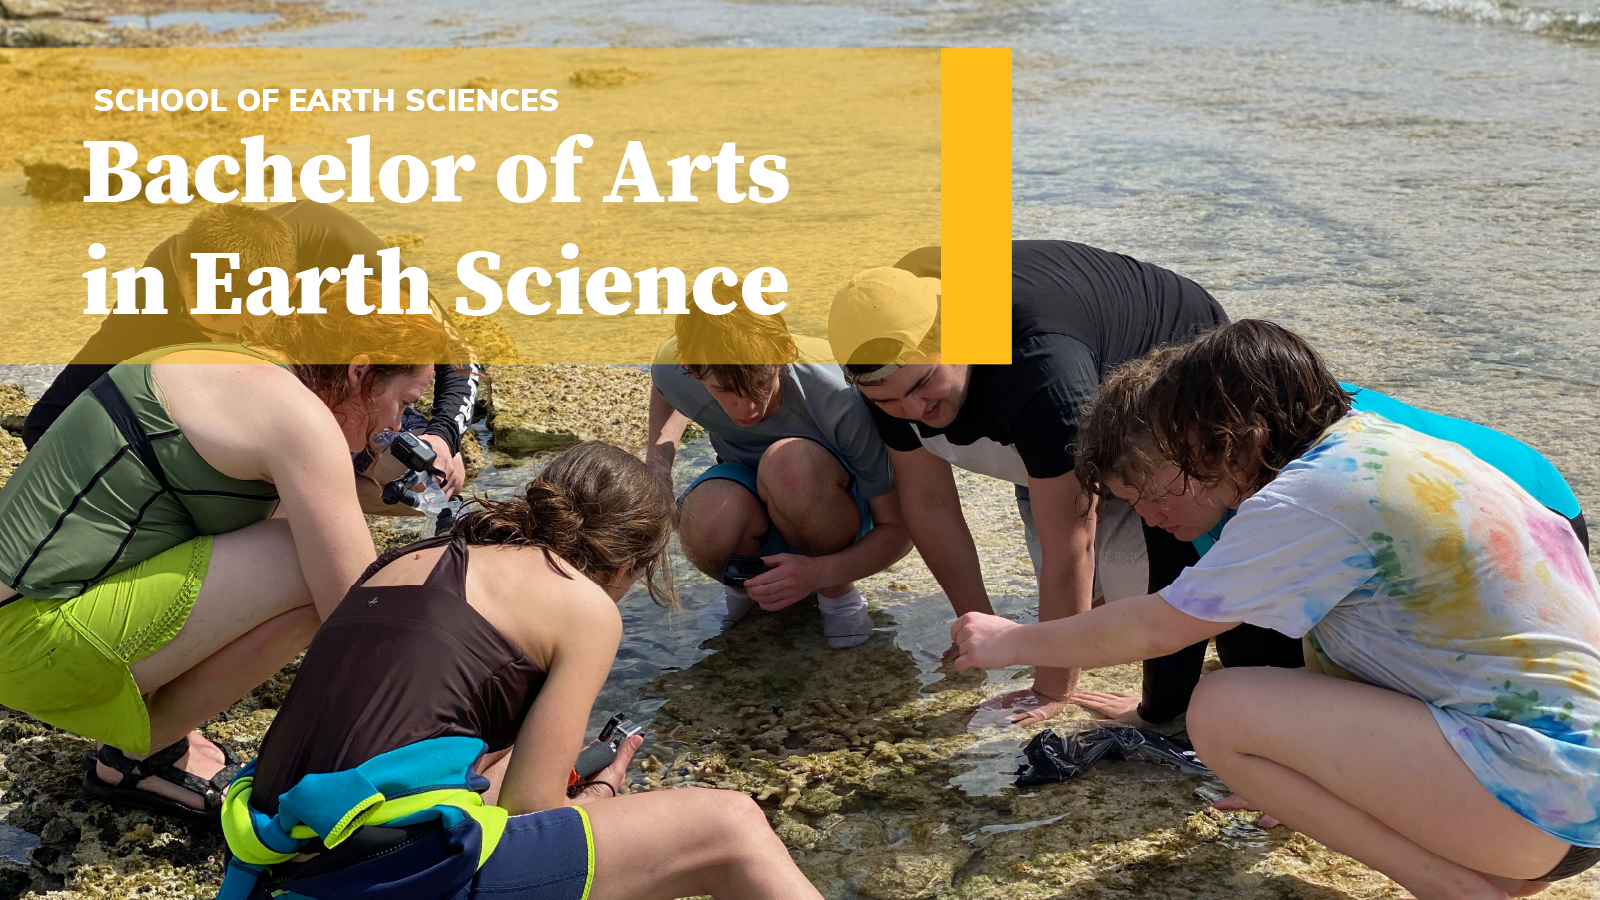 A group of students inspect the contents of a body of water and a yellow banner reading "Bachelor of Arts in Earth Science" is above them